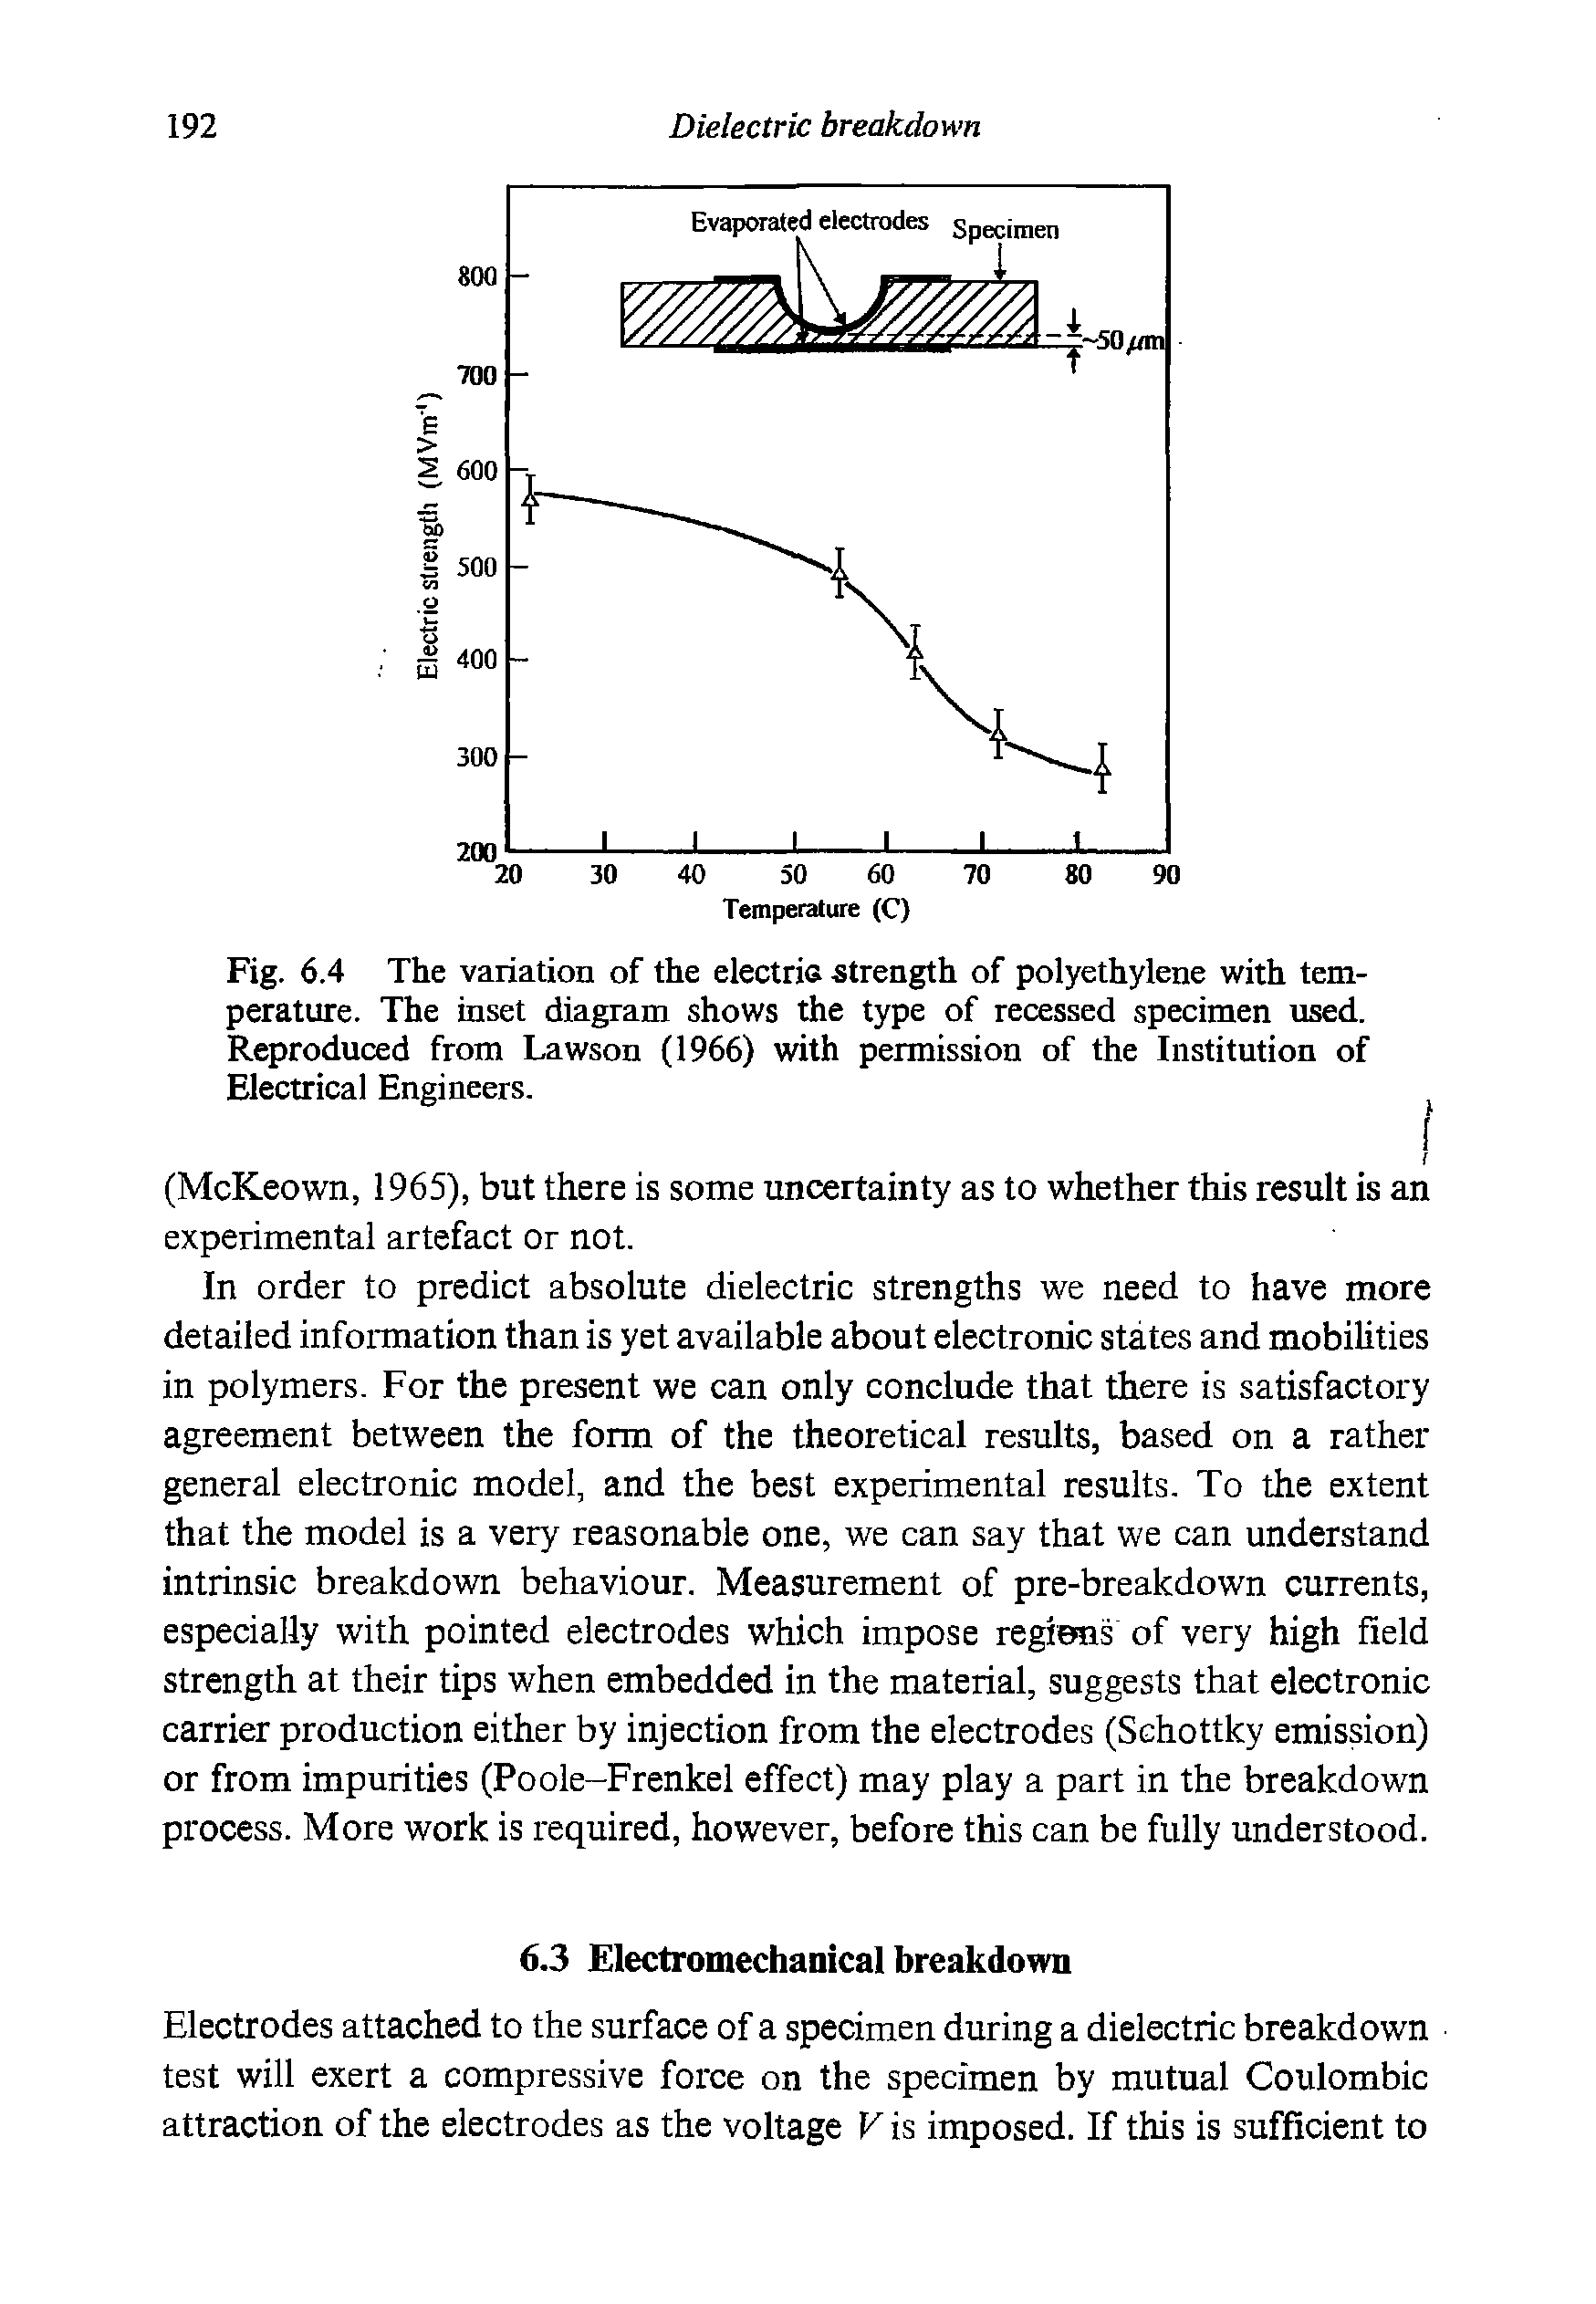 Fig. 6.4 The variation of the electriG strength of polyethylene with temperature. The inset diagram shows the type of recessed specimen used. Reproduced from Lawson (1966) with permission of the Institution of Electrical Engineers.